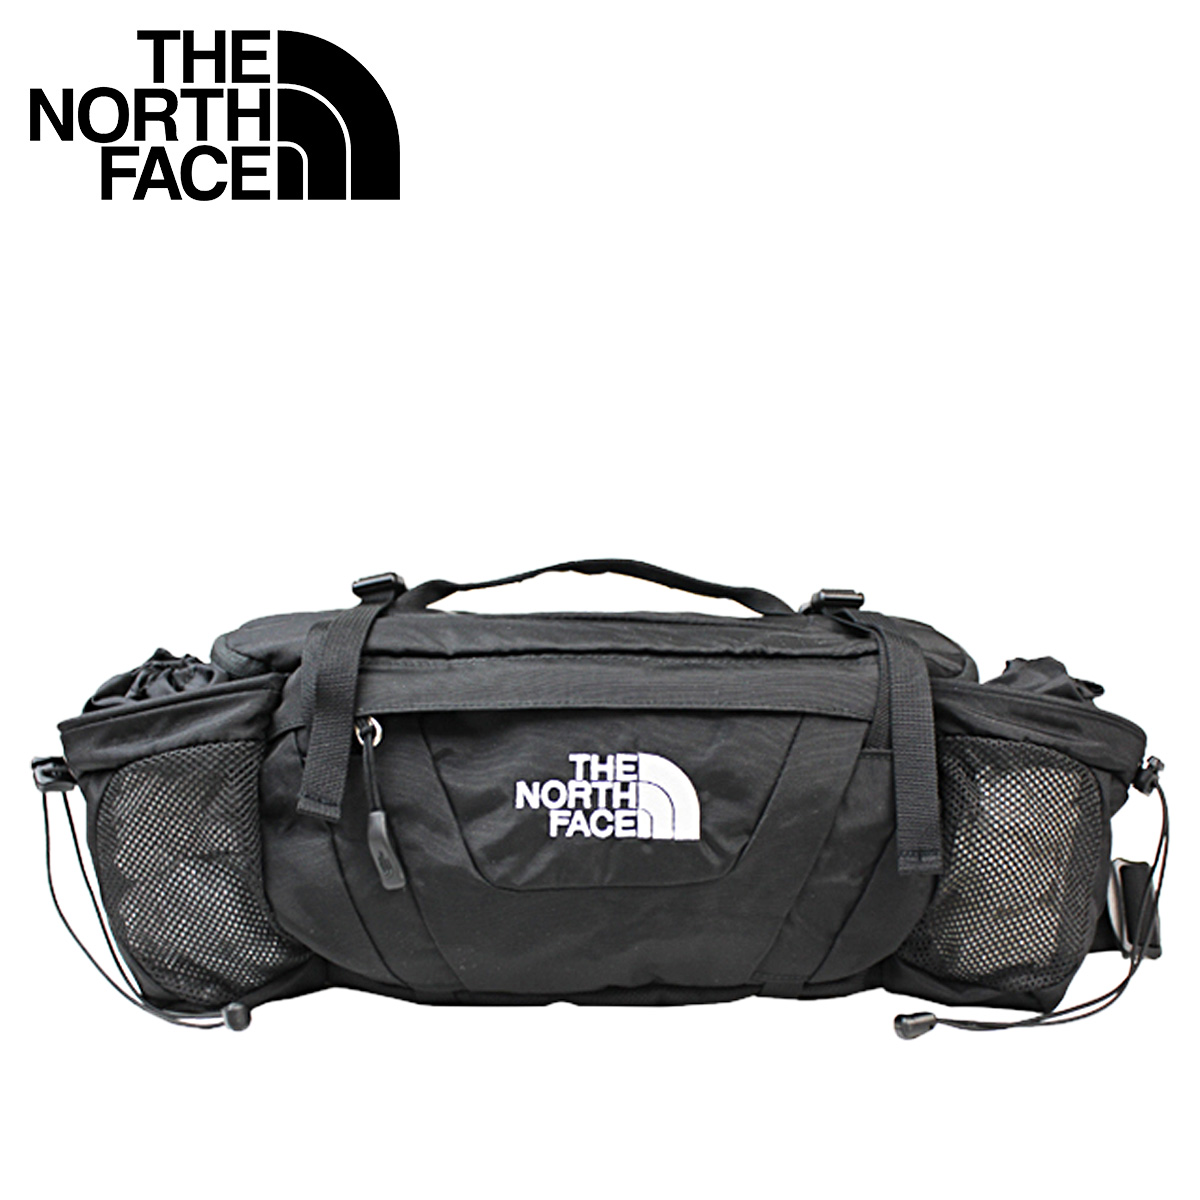 ALLSPORTS: Point 2 times the north face THE NORTH FACE bag waist bag mens Womens hip bag 2015 ...